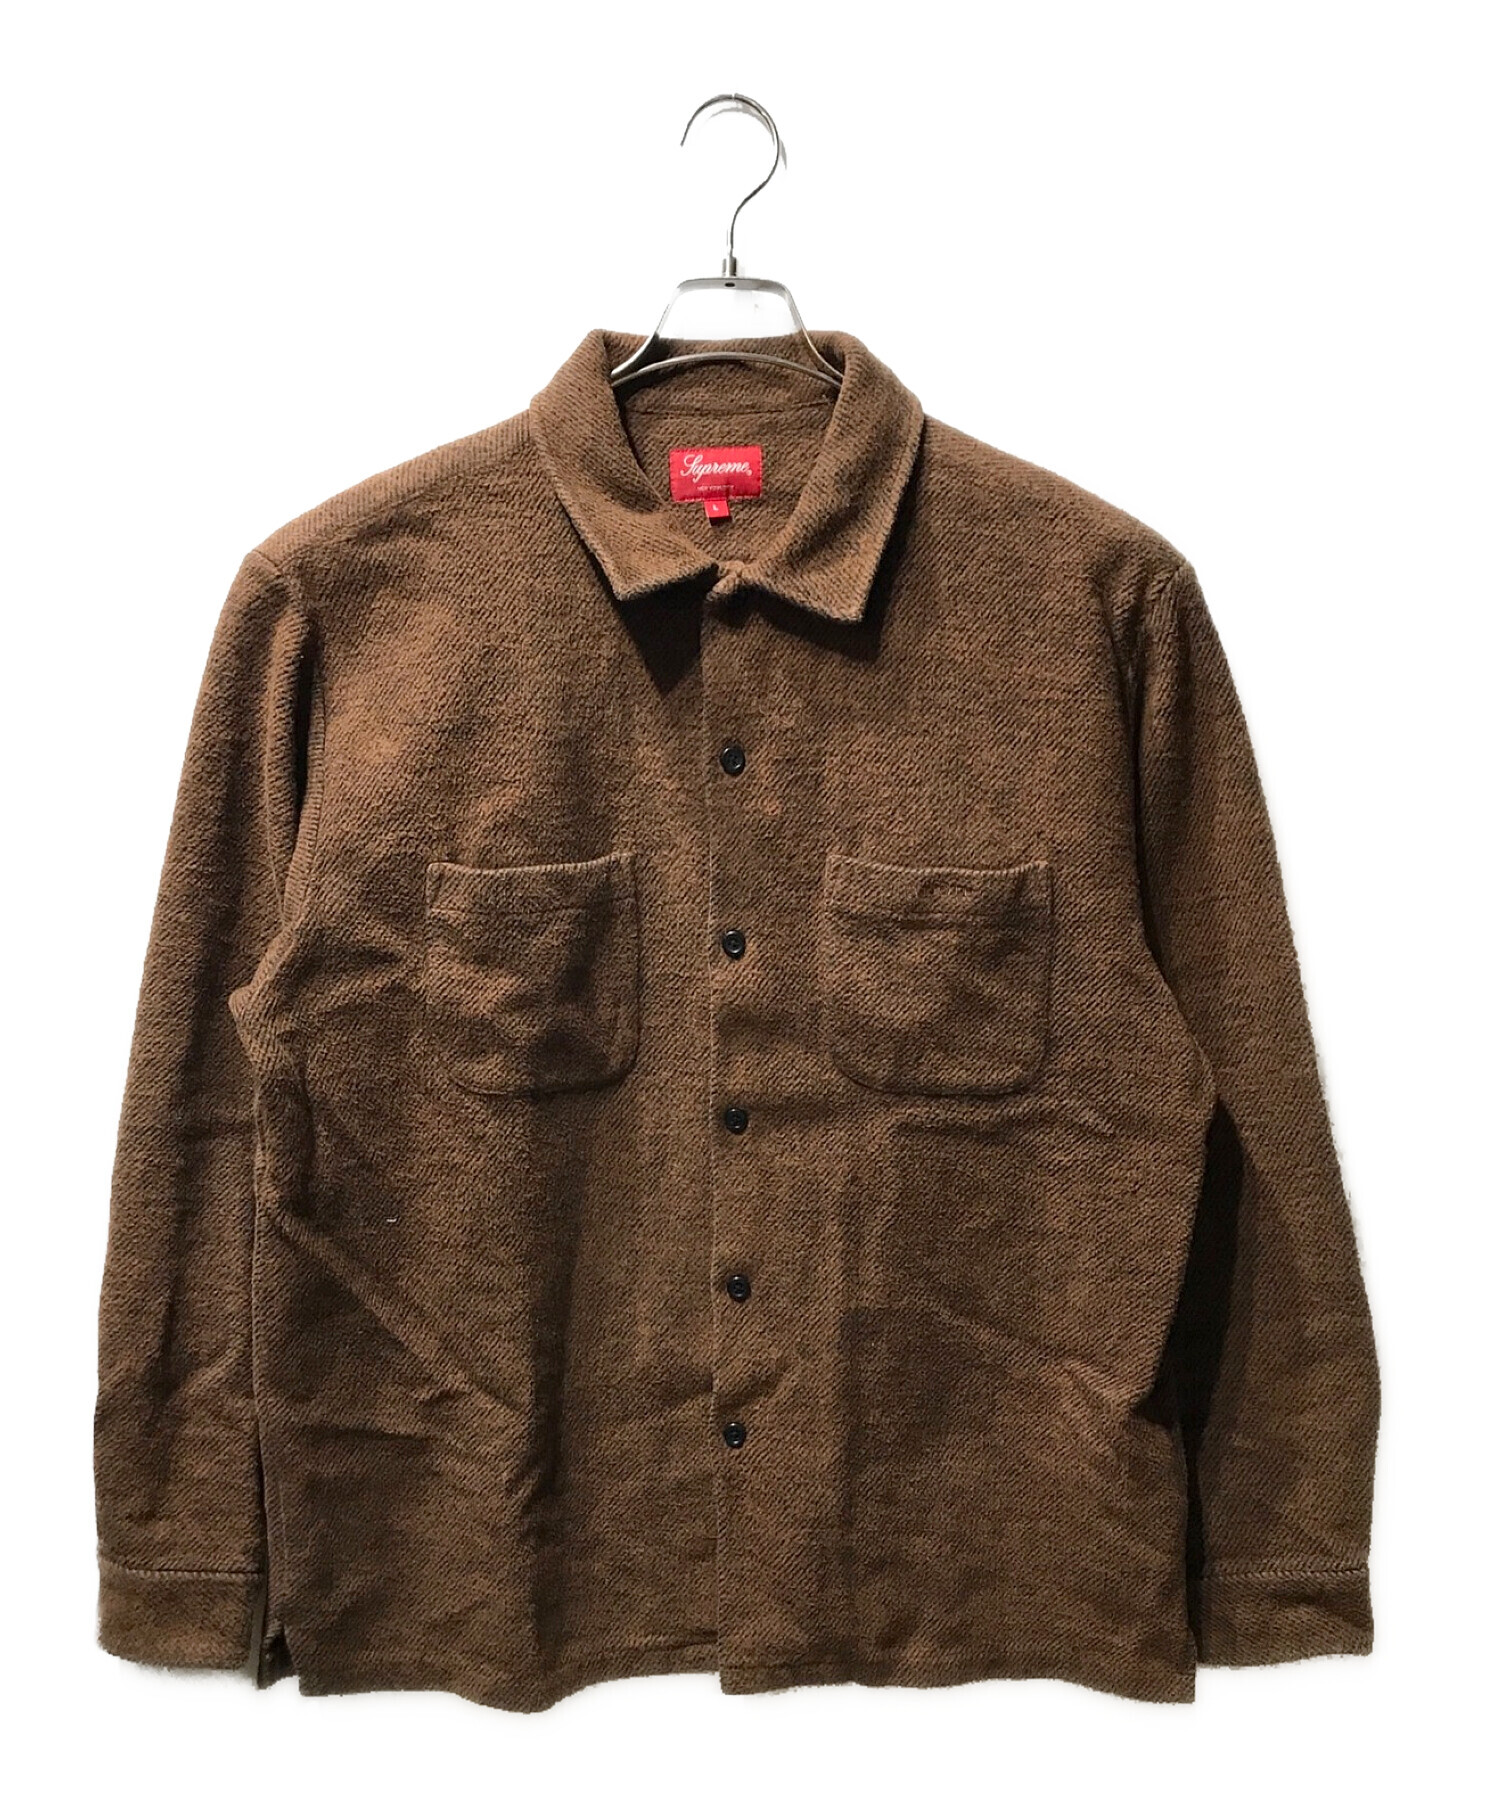 Supreme 22AW Brushed Flannel Twill Shirtシュプリーム